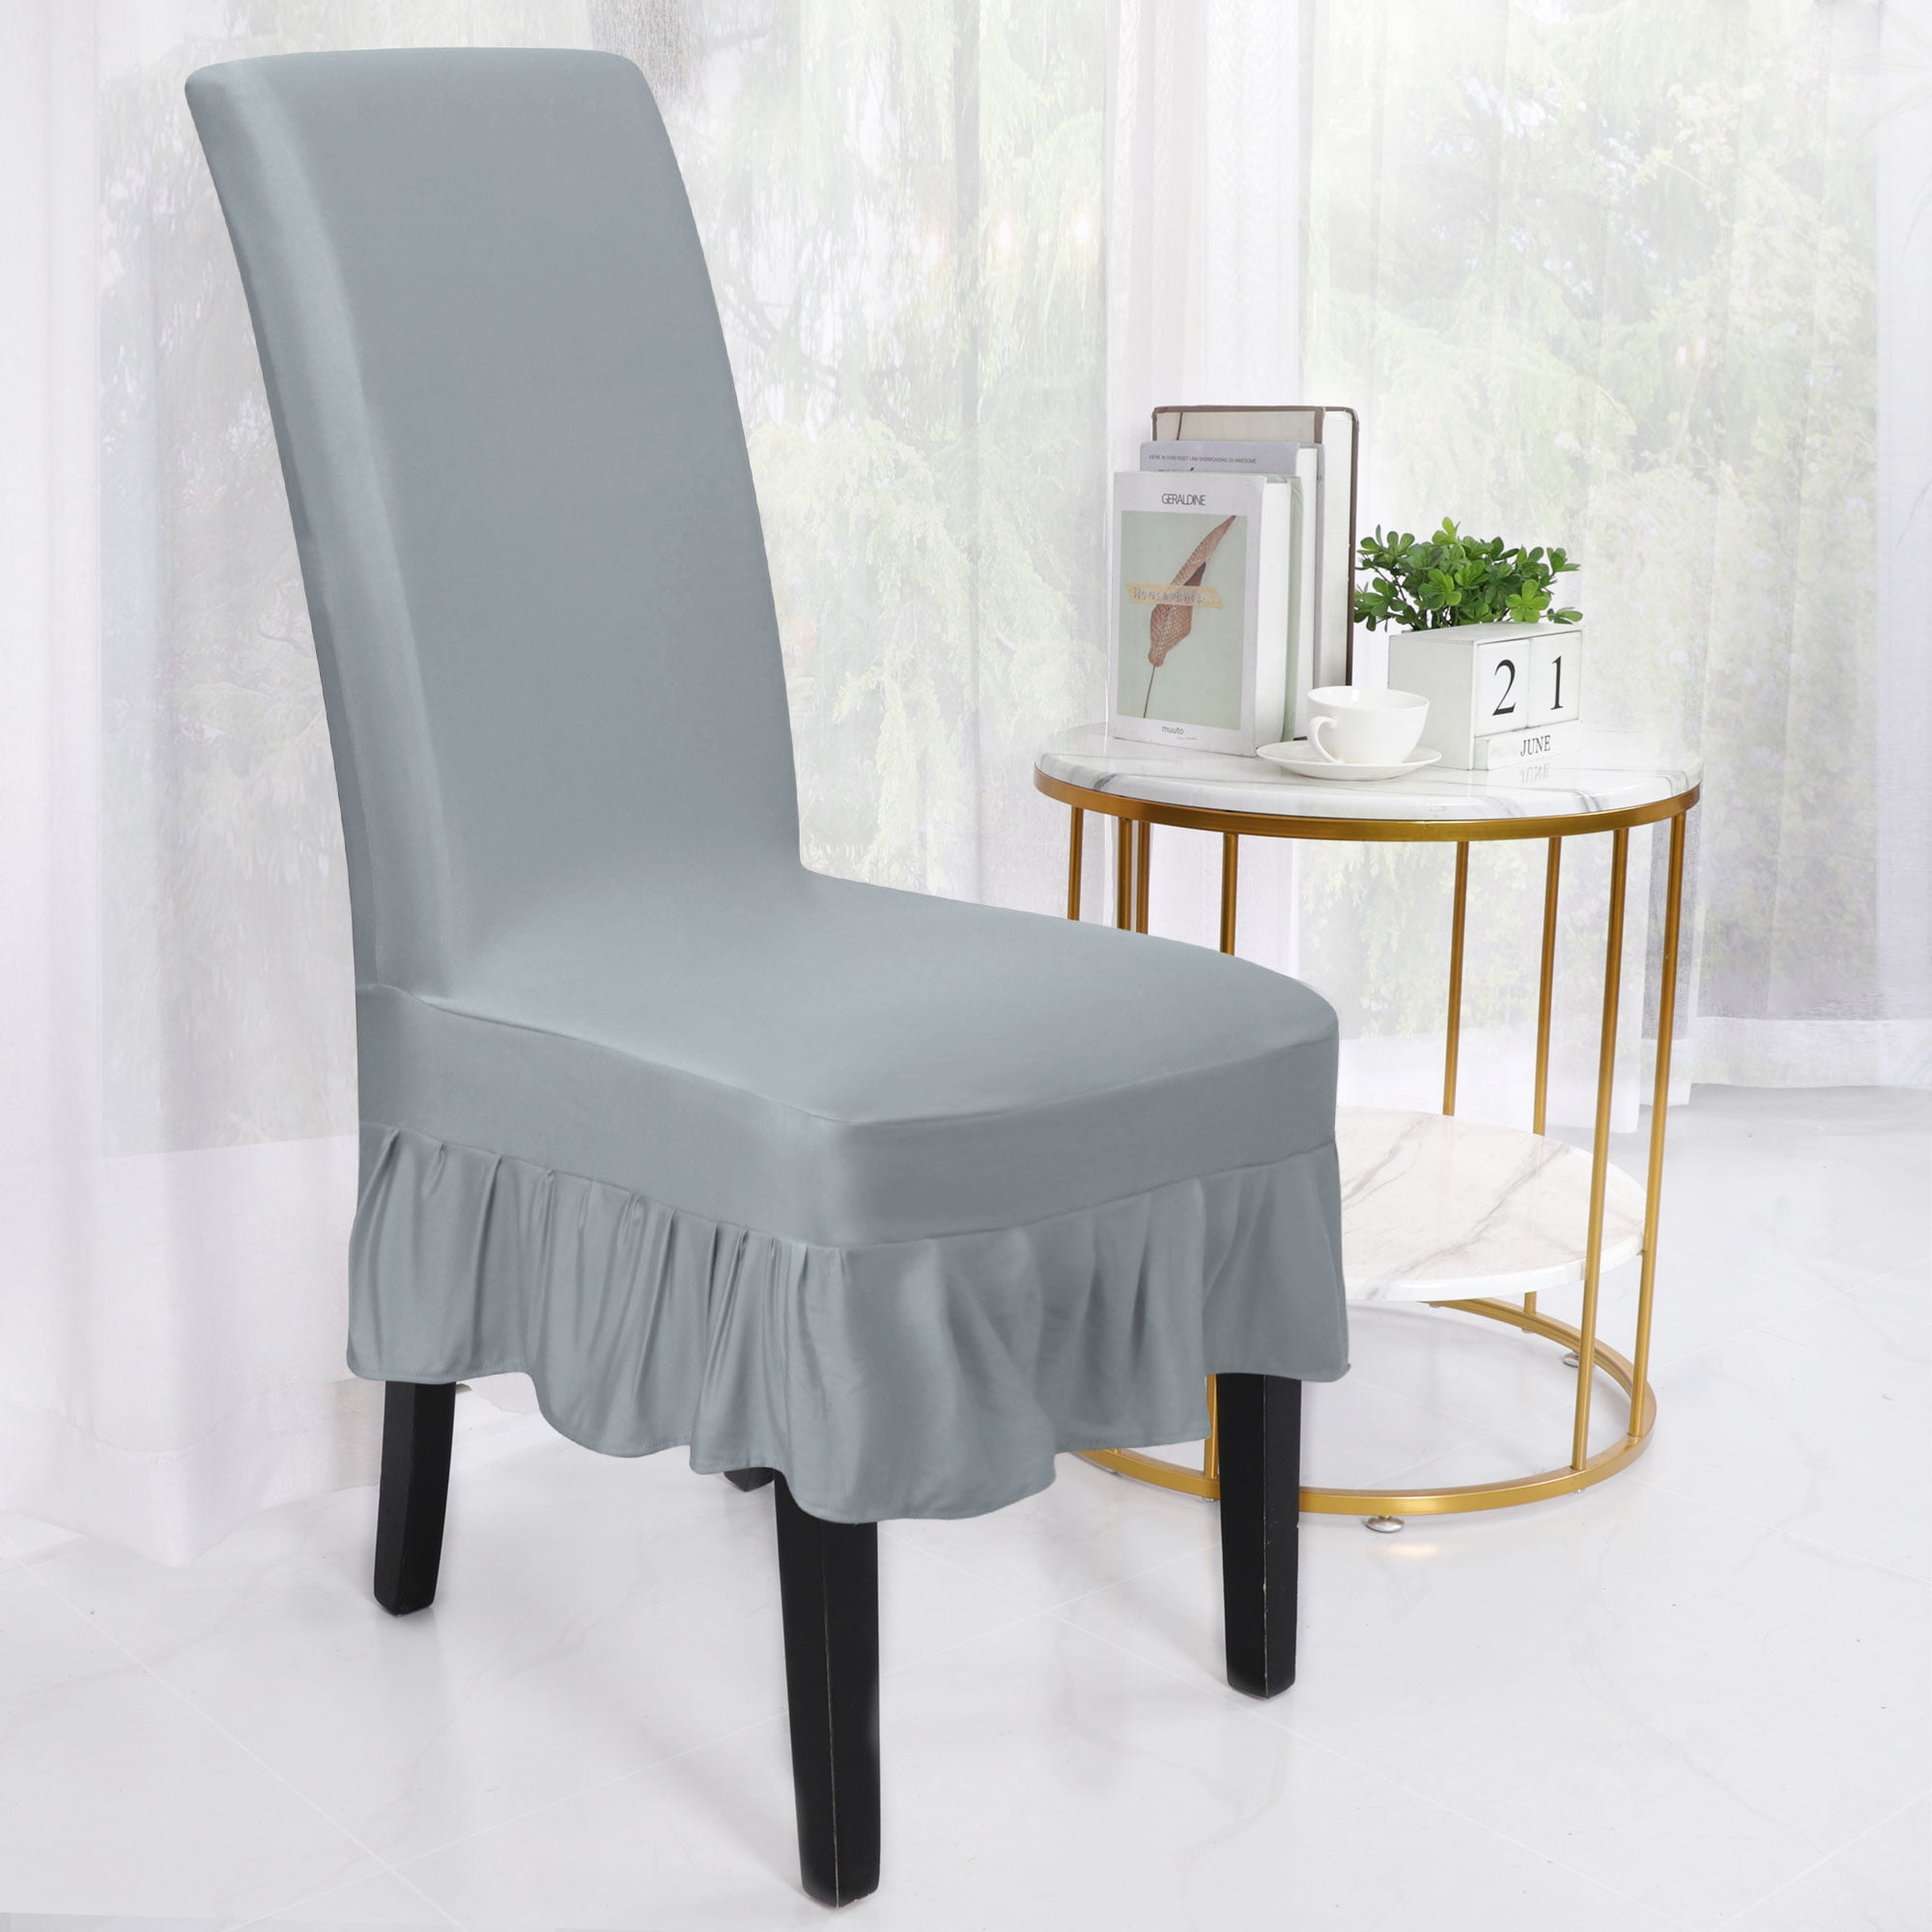 Details about   Stretch Dining Chair Covers Slipcovers Wedding Banquet Decor Seat Covers Hot 